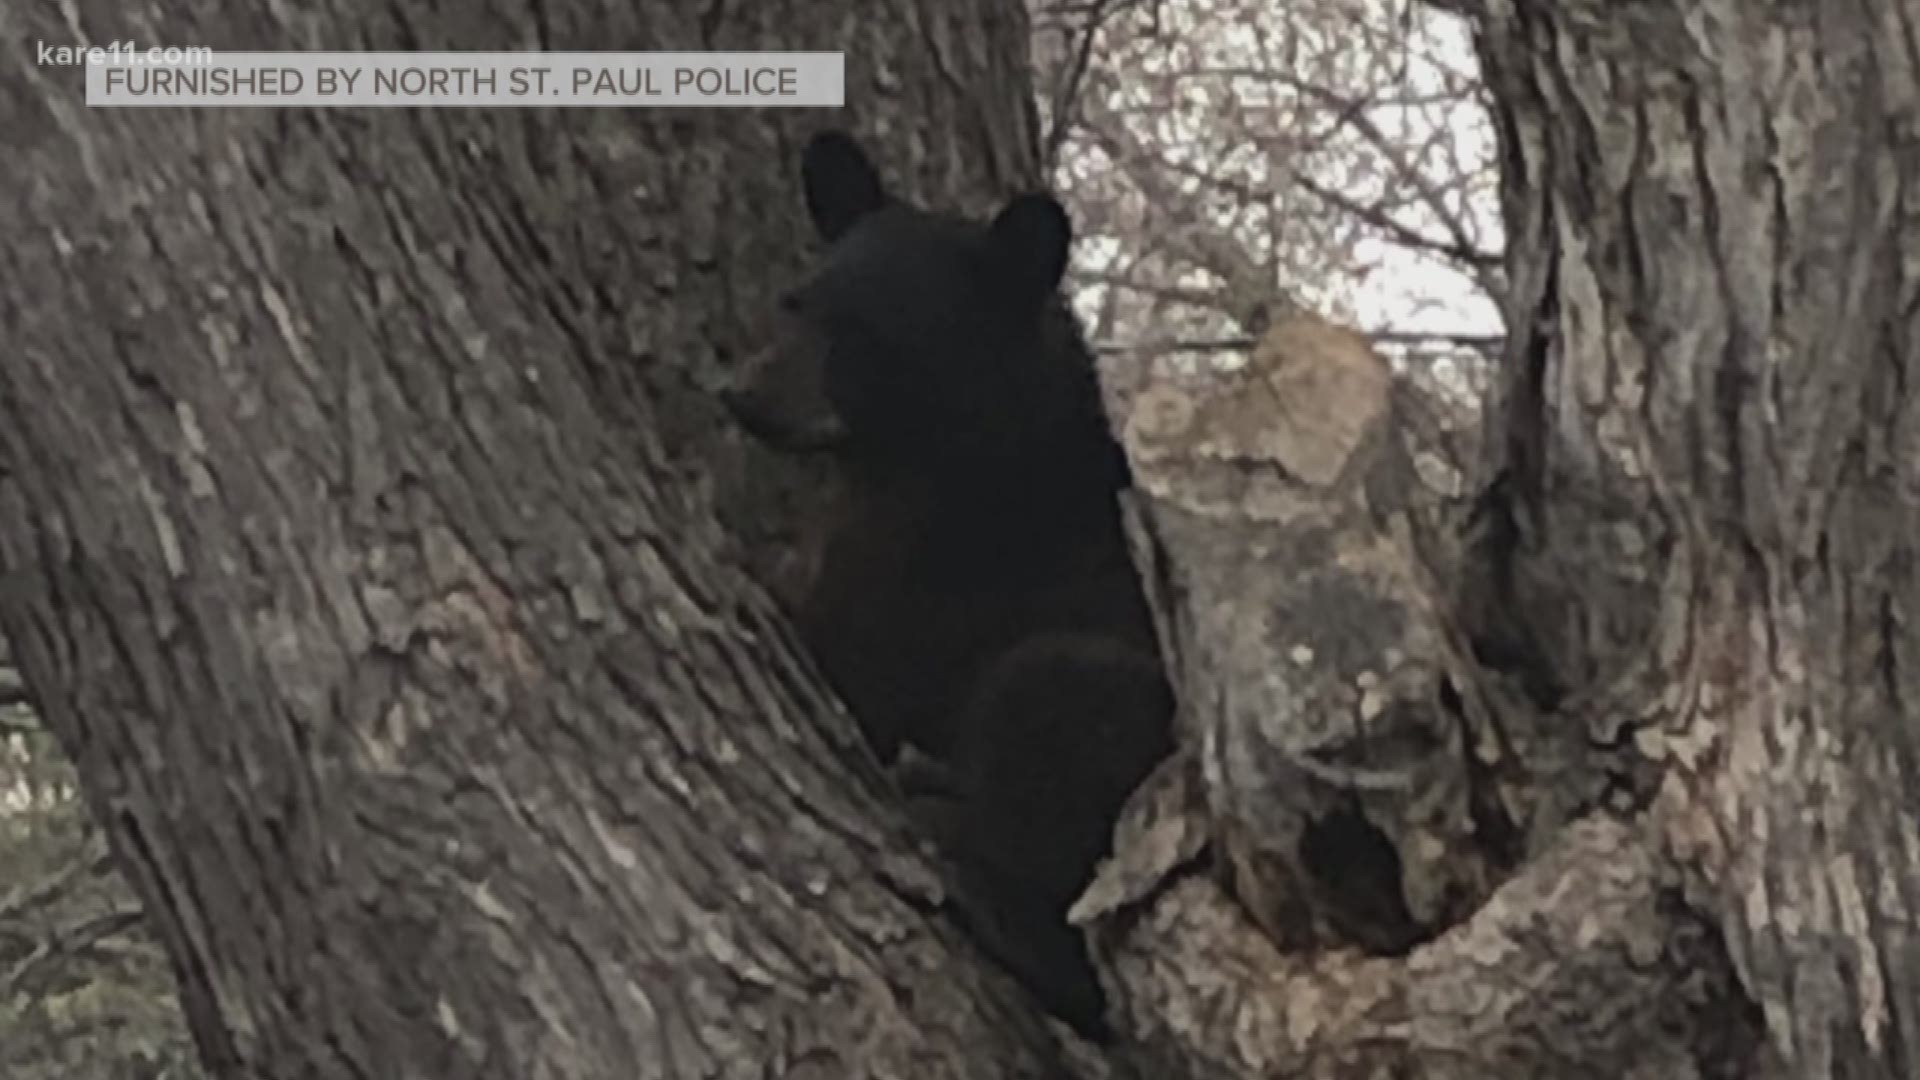 The city says a bear was reported near North Heights Lutheran Church.